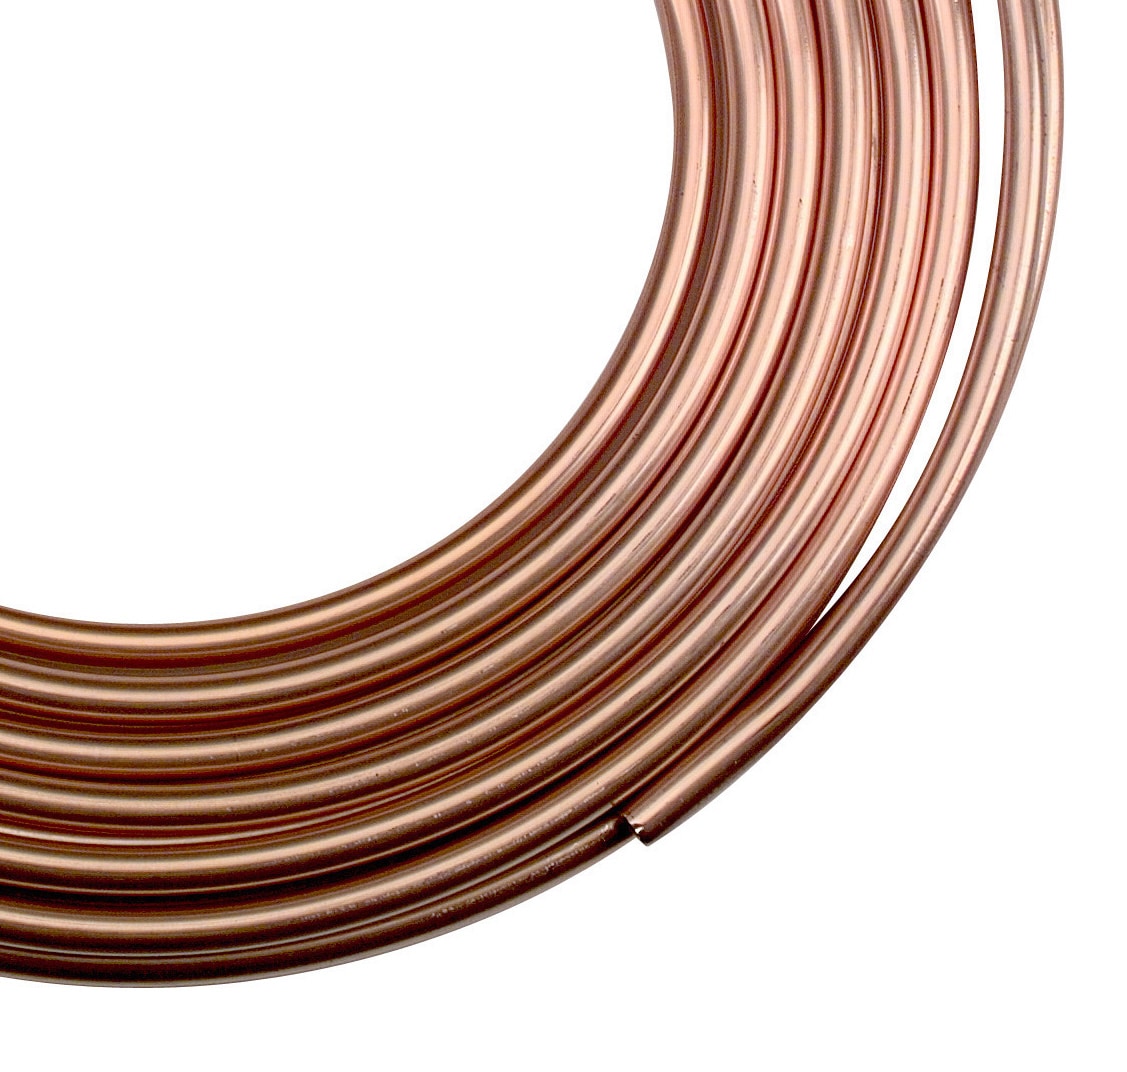 Streamline 1/2-in x 50-ft Soft Copper Refrigeration Coil in the